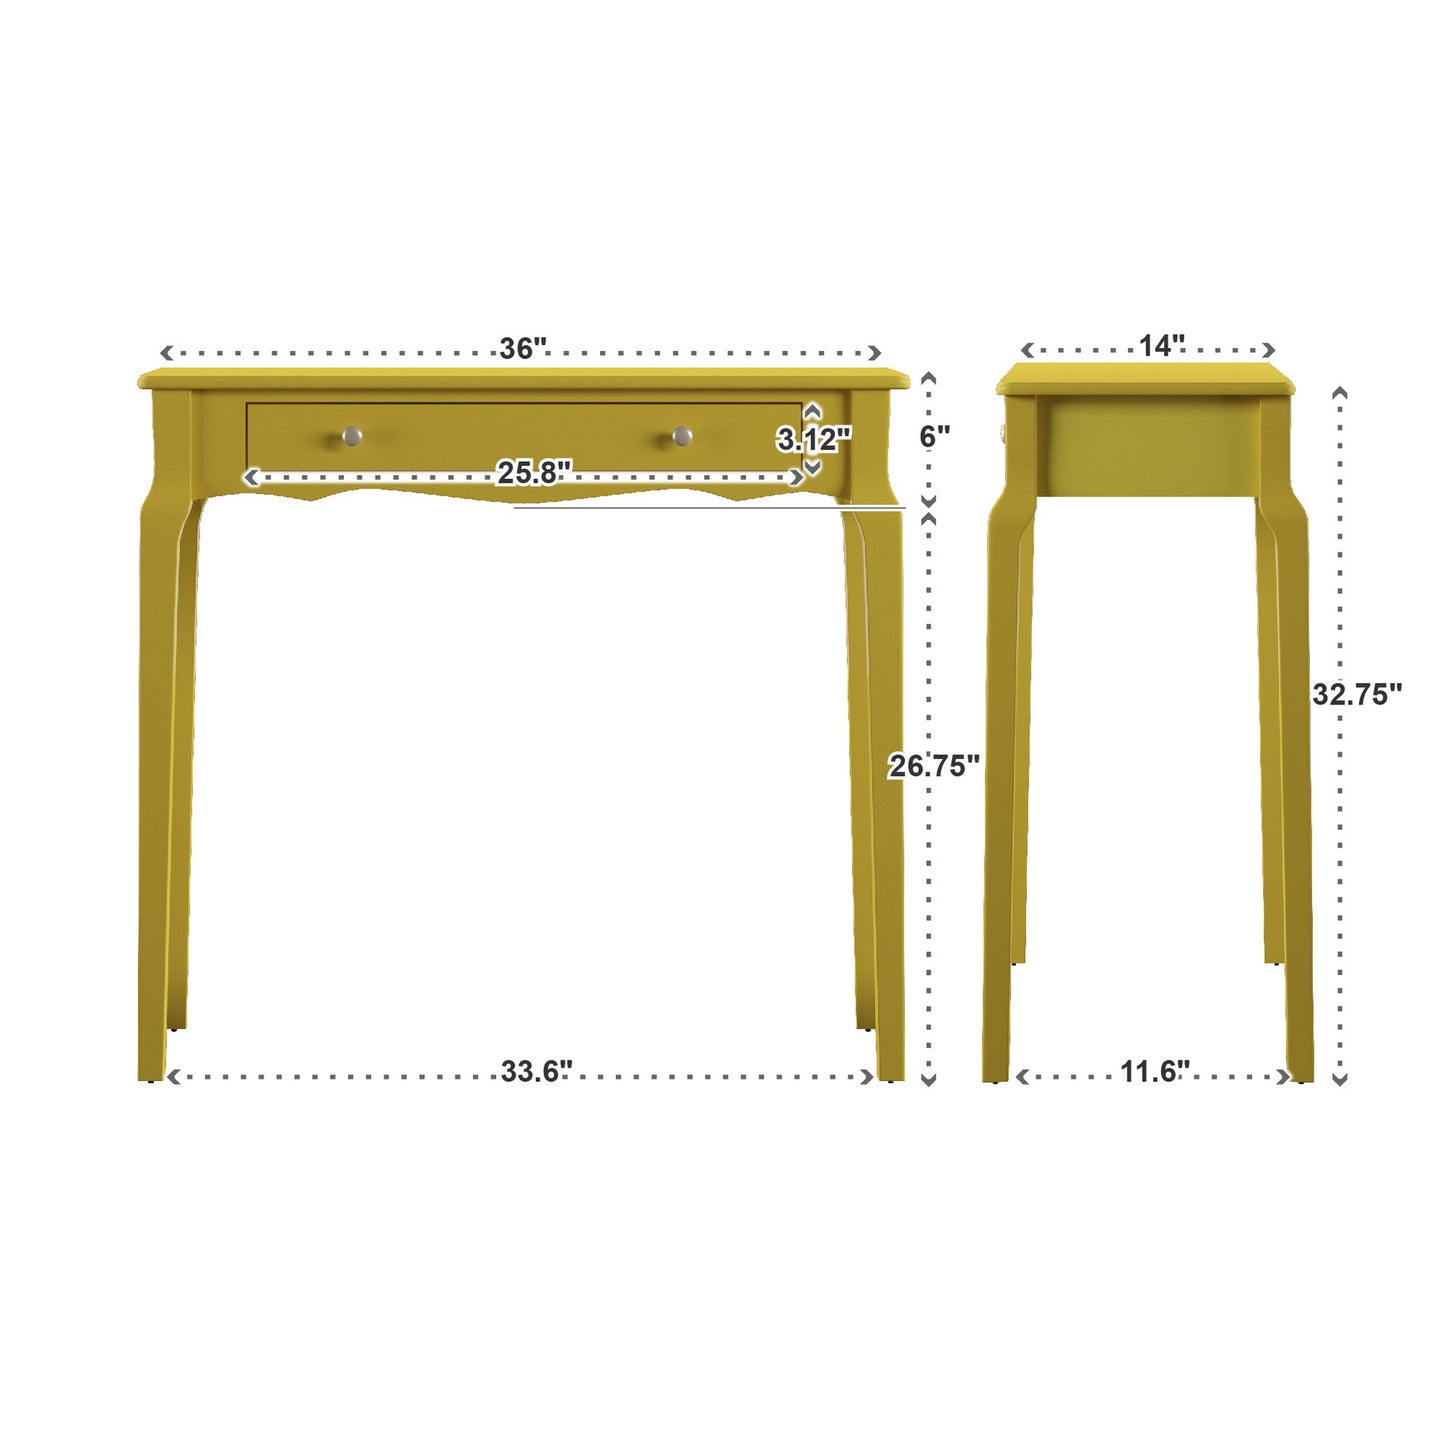 1-Drawer Wood Accent Console Sofa Table - Yellow